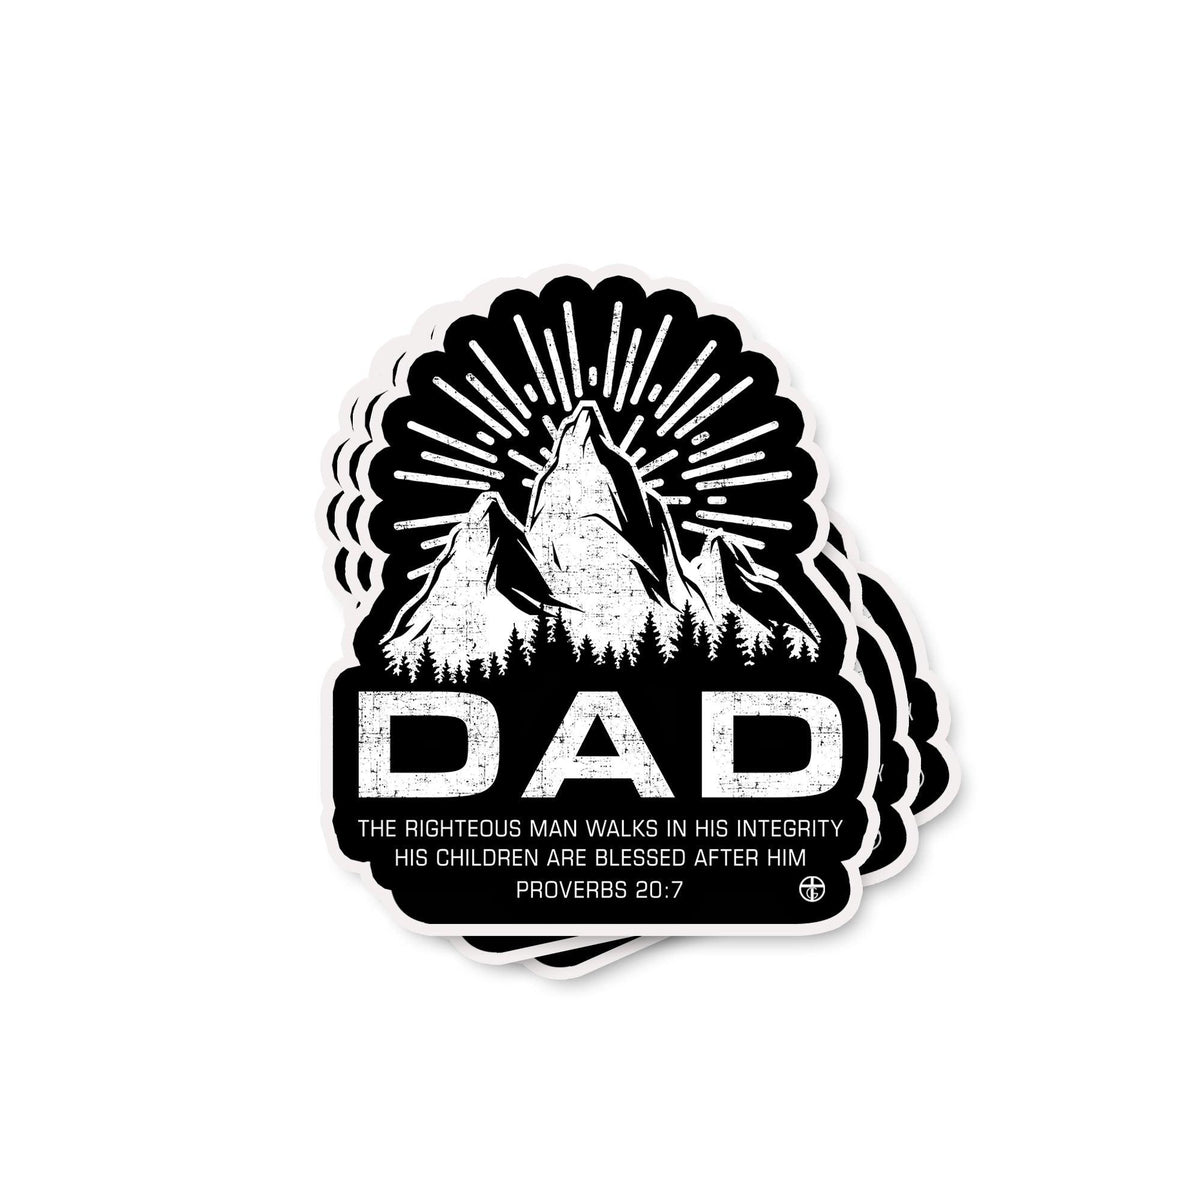 Dad, Proverbs 20:7 Decals - Our True God